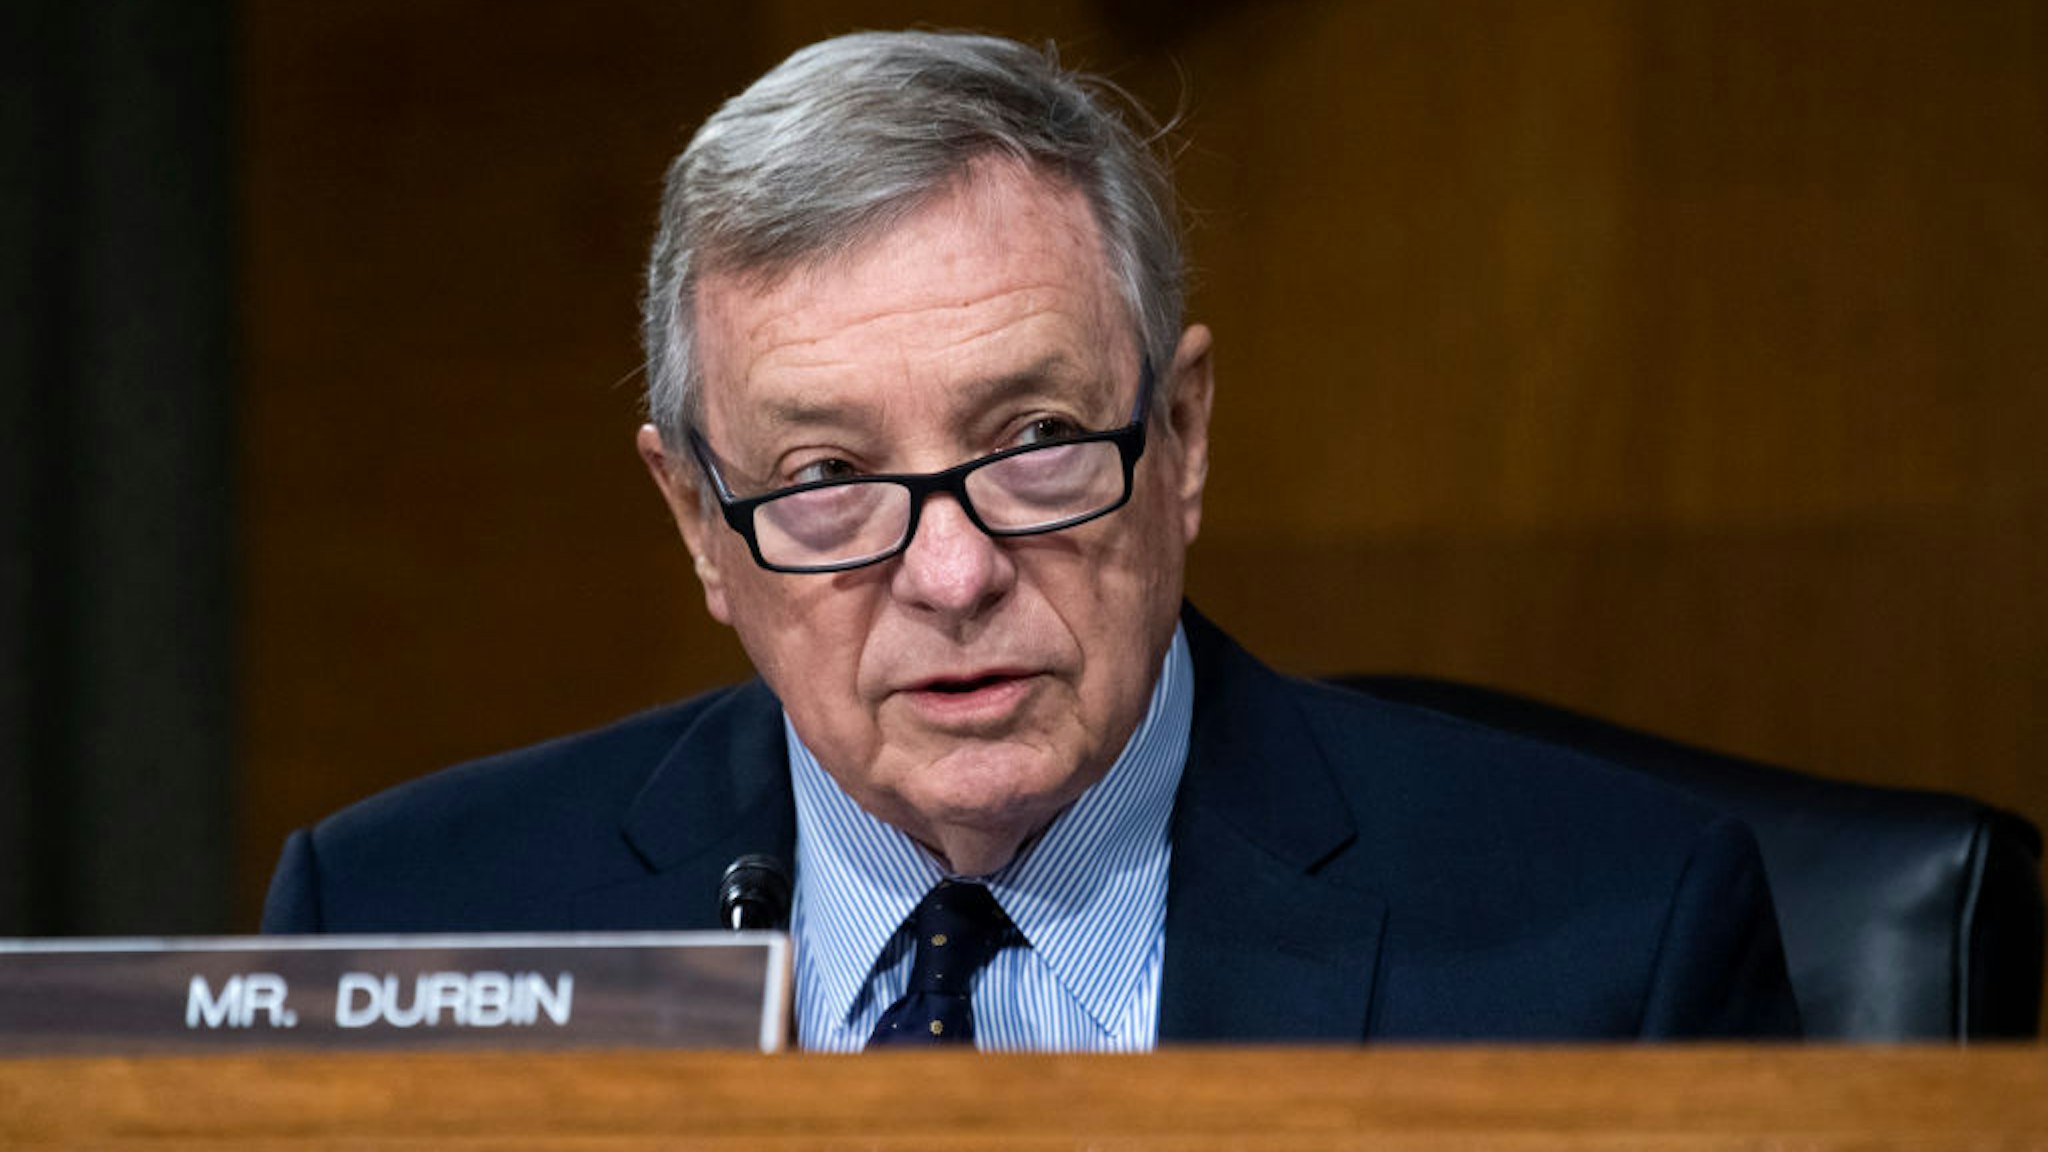 Sen. Richard Durbin (D-IL) makes an opening statement during the Senate Judiciary Committee hearing examining risks of Covid-19 in jails at the Dirksen Building of the U.S. Capitol June 2, 2020 in Washington, D.C. (Photo By Tom Williams-Pool/Getty Images)